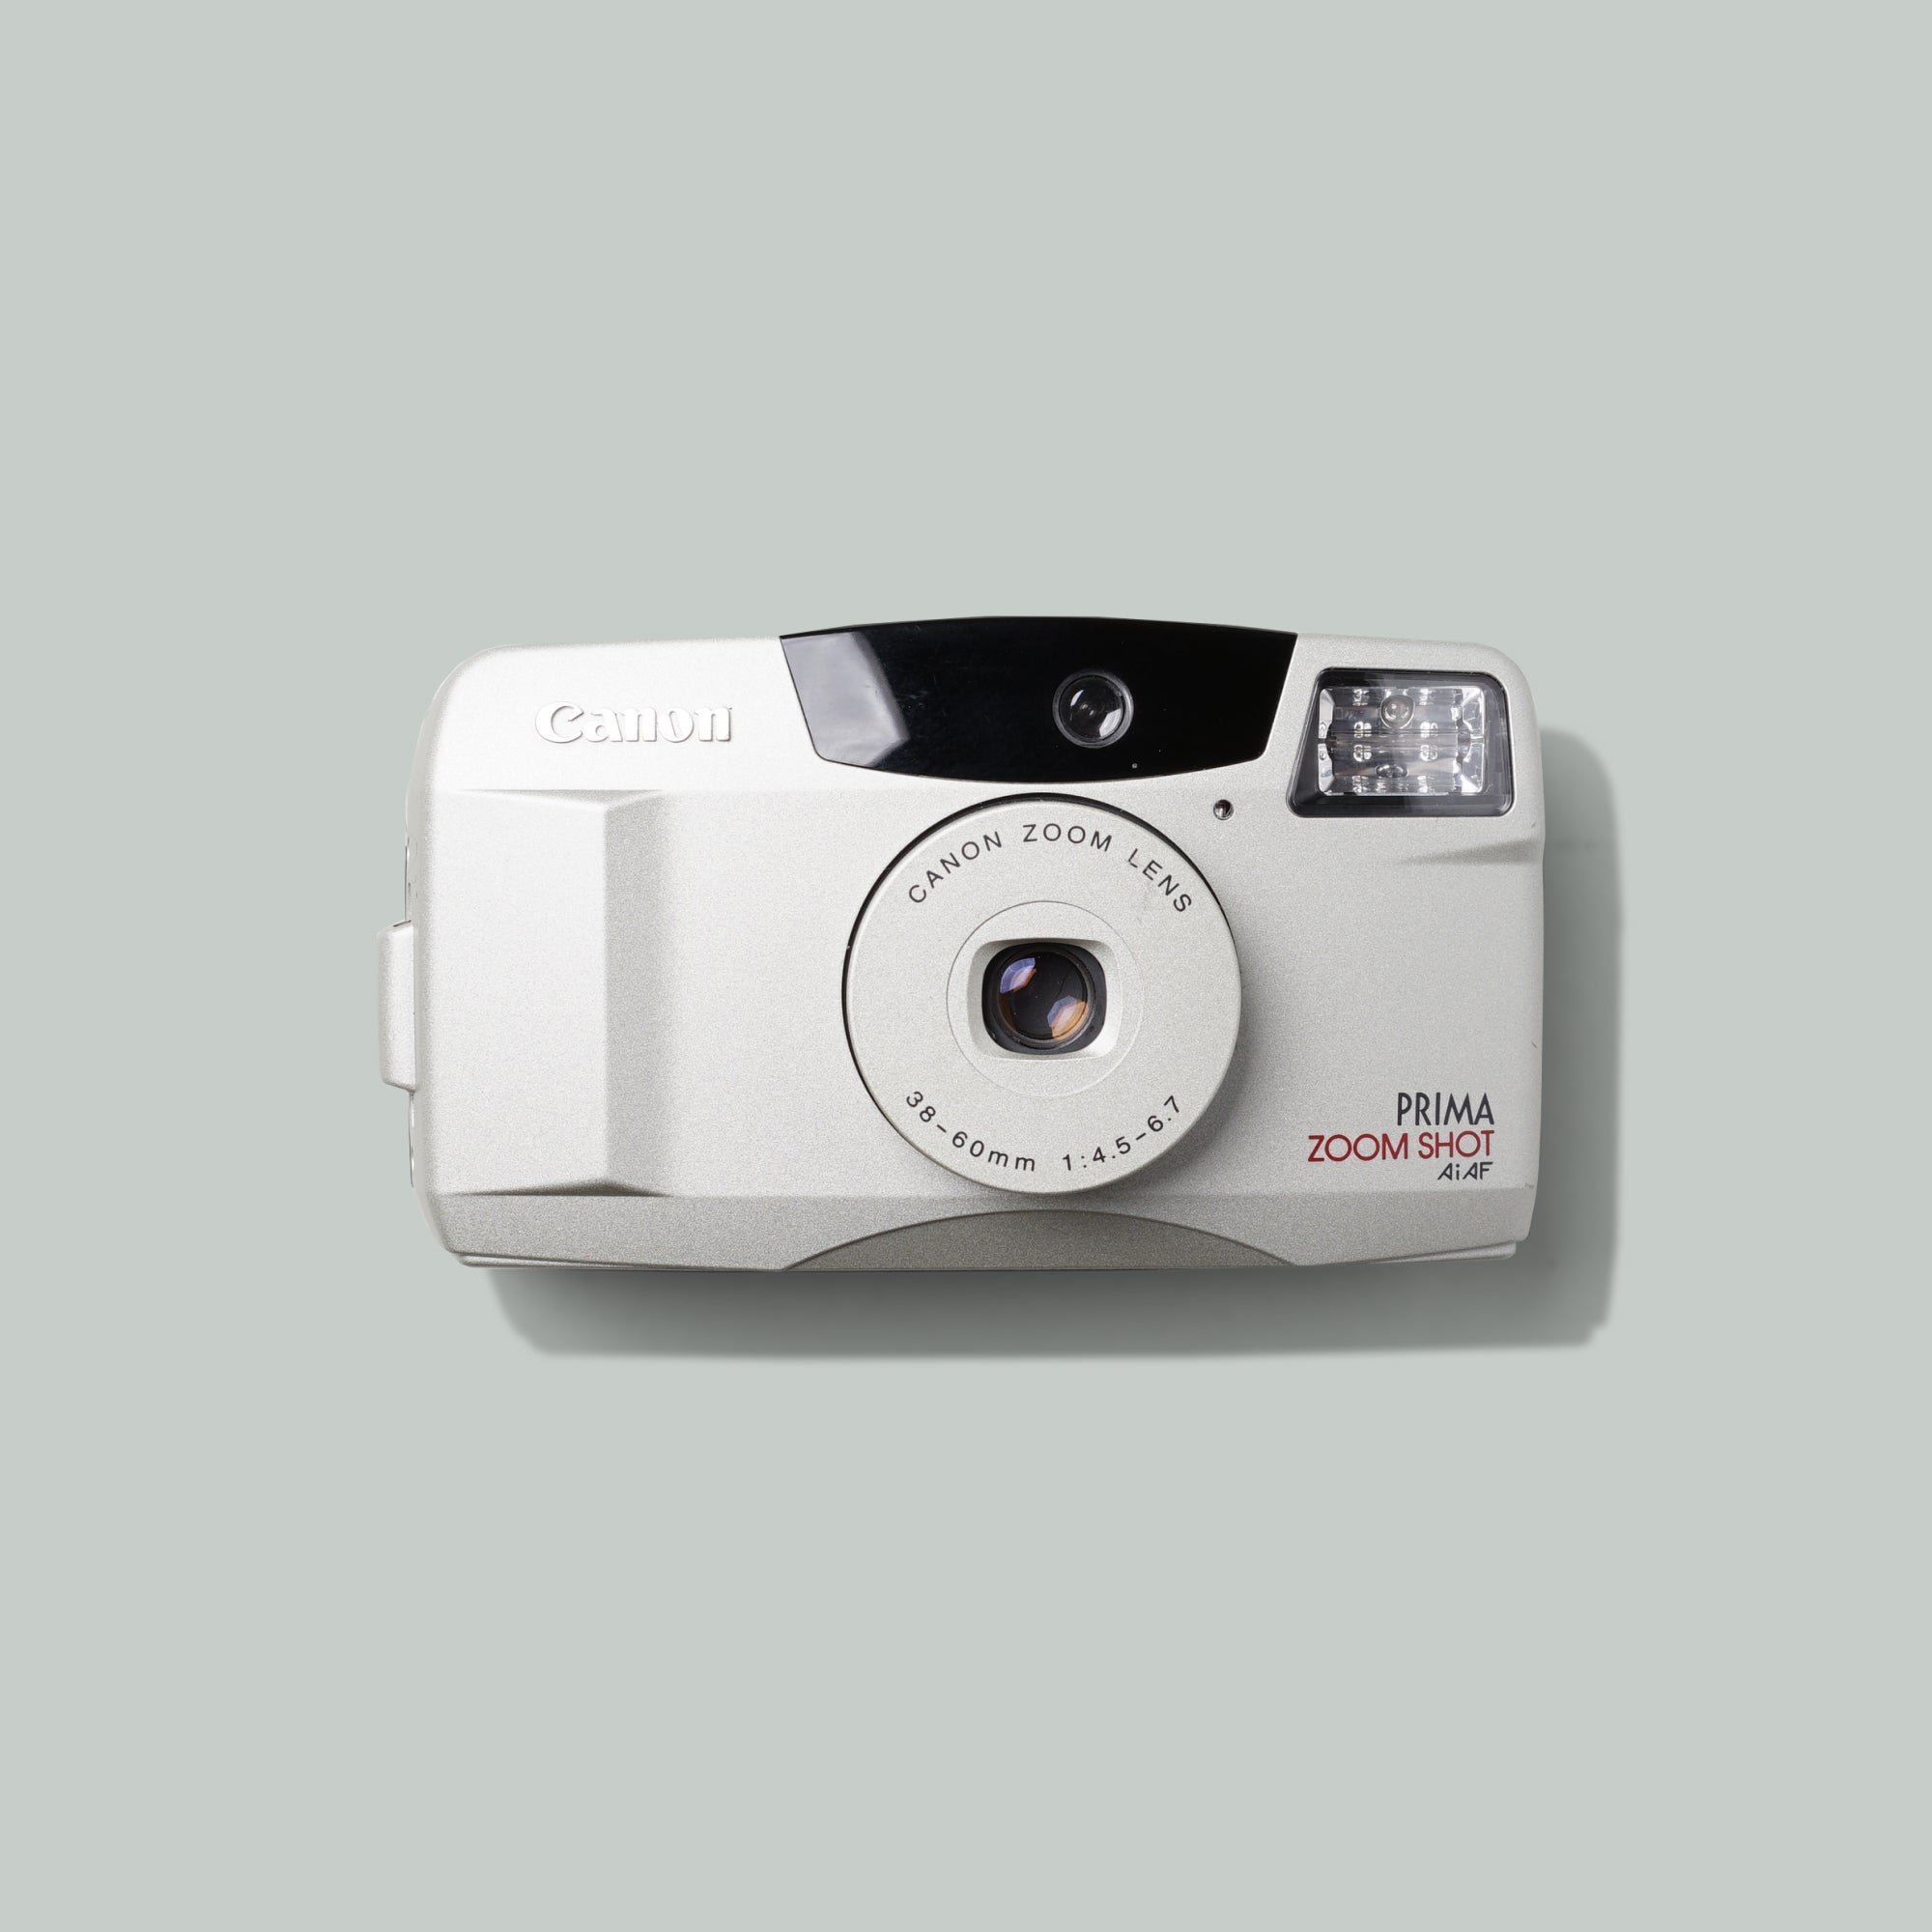 Buy Canon Prima Zoom Shot now at Analogue Amsterdam